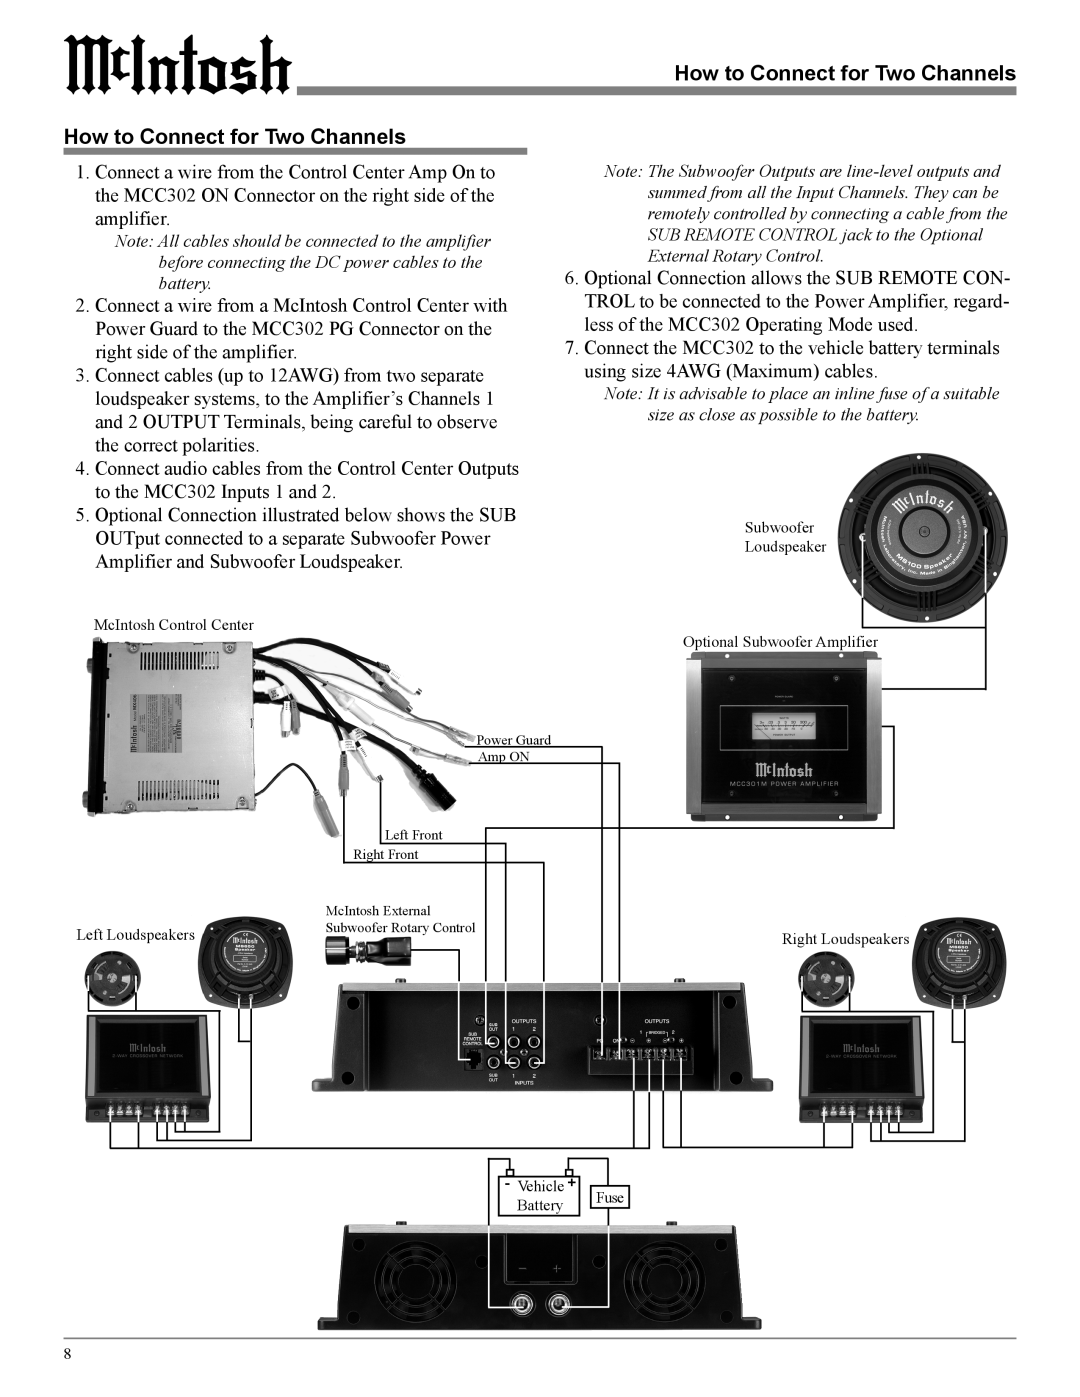 McIntosh MCC302M How to Connect for Two Channels, McIntosh Control Center, Subwoofer Loudspeaker, Left Loudspeakers, Fuse 